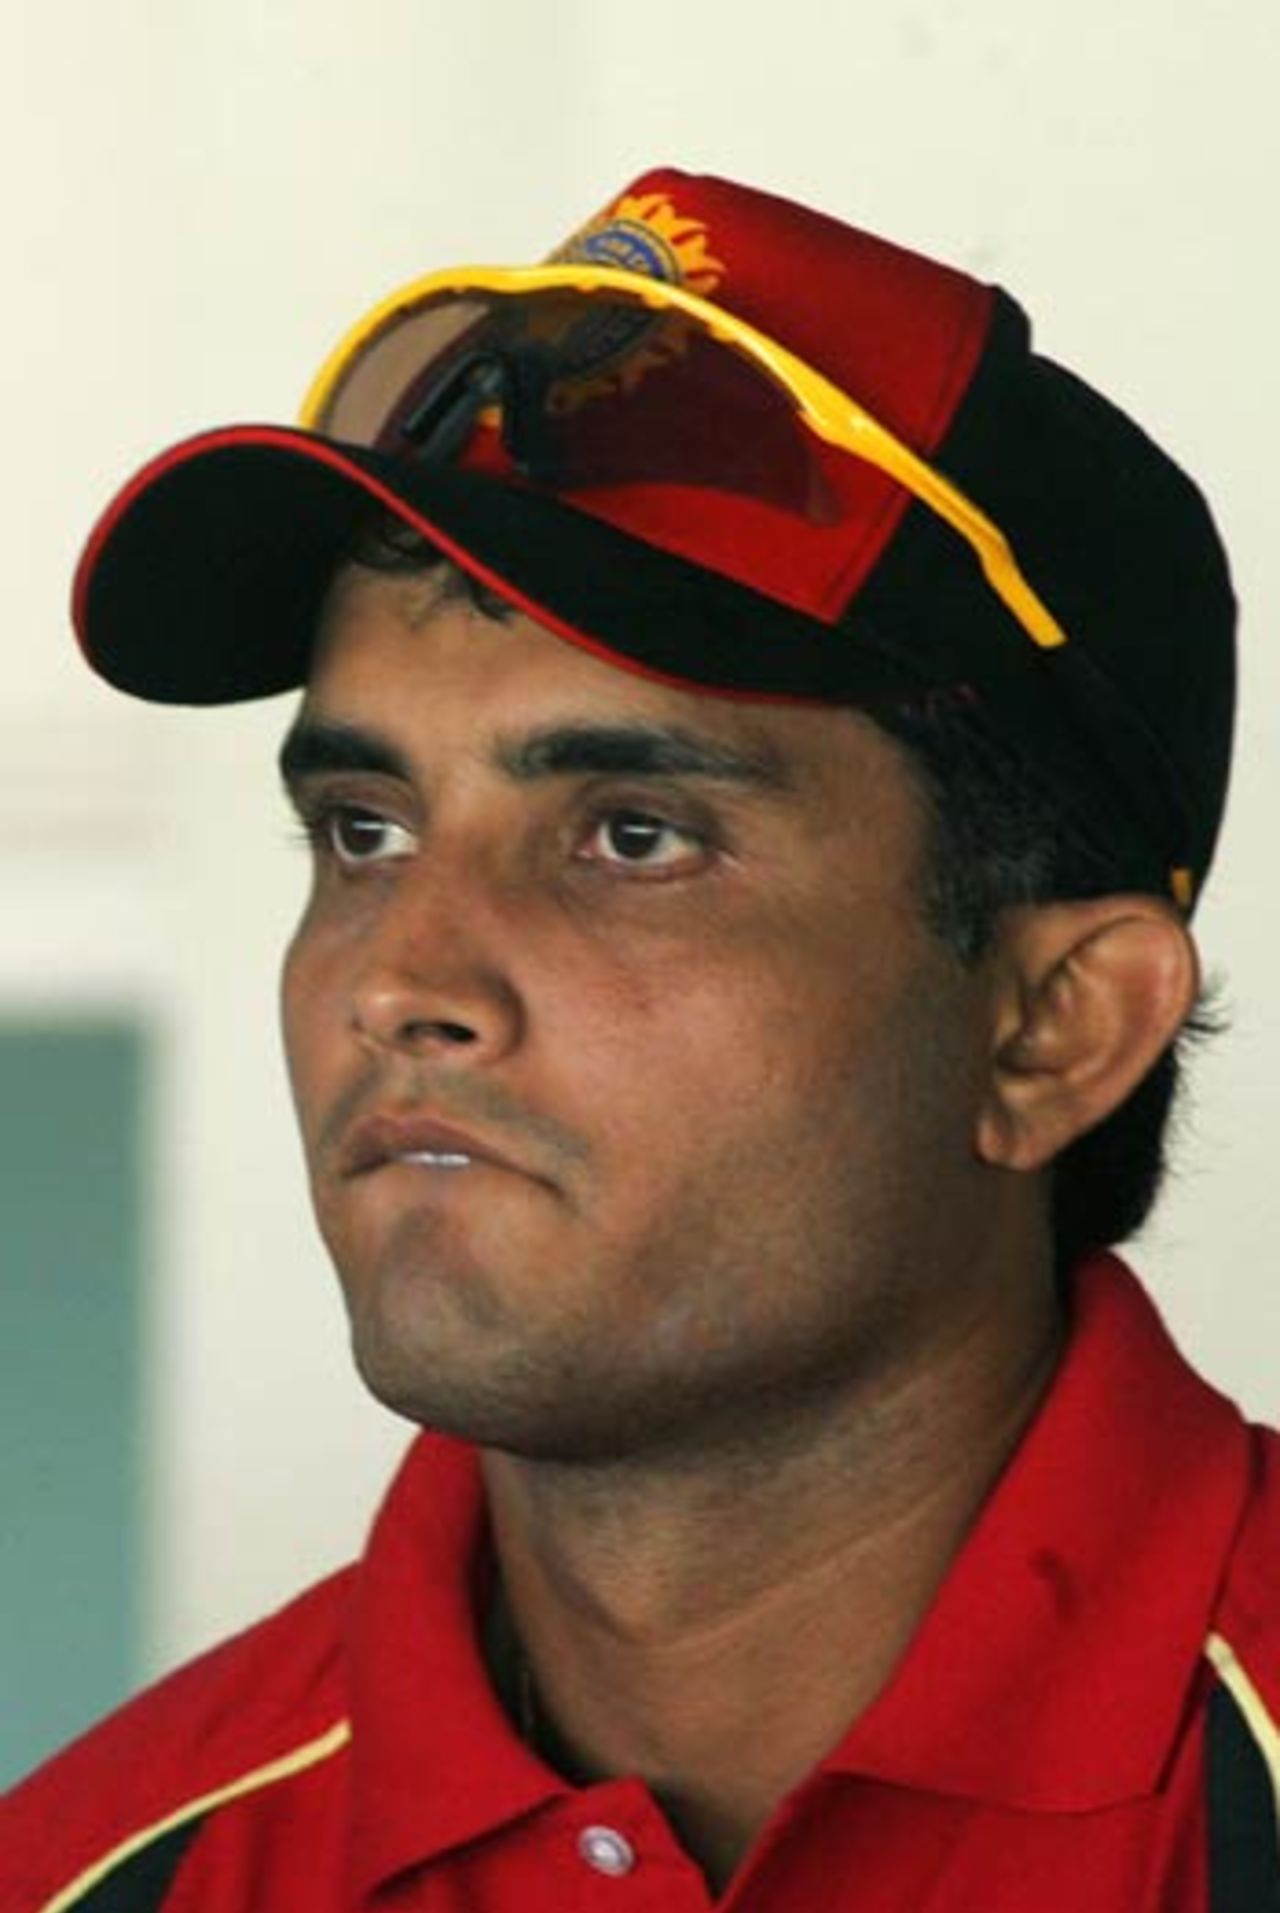 Sourav Ganguly watches on before the start of the second game, India Blue v India Green, Challenger Series, Chennai, October 2, 2006